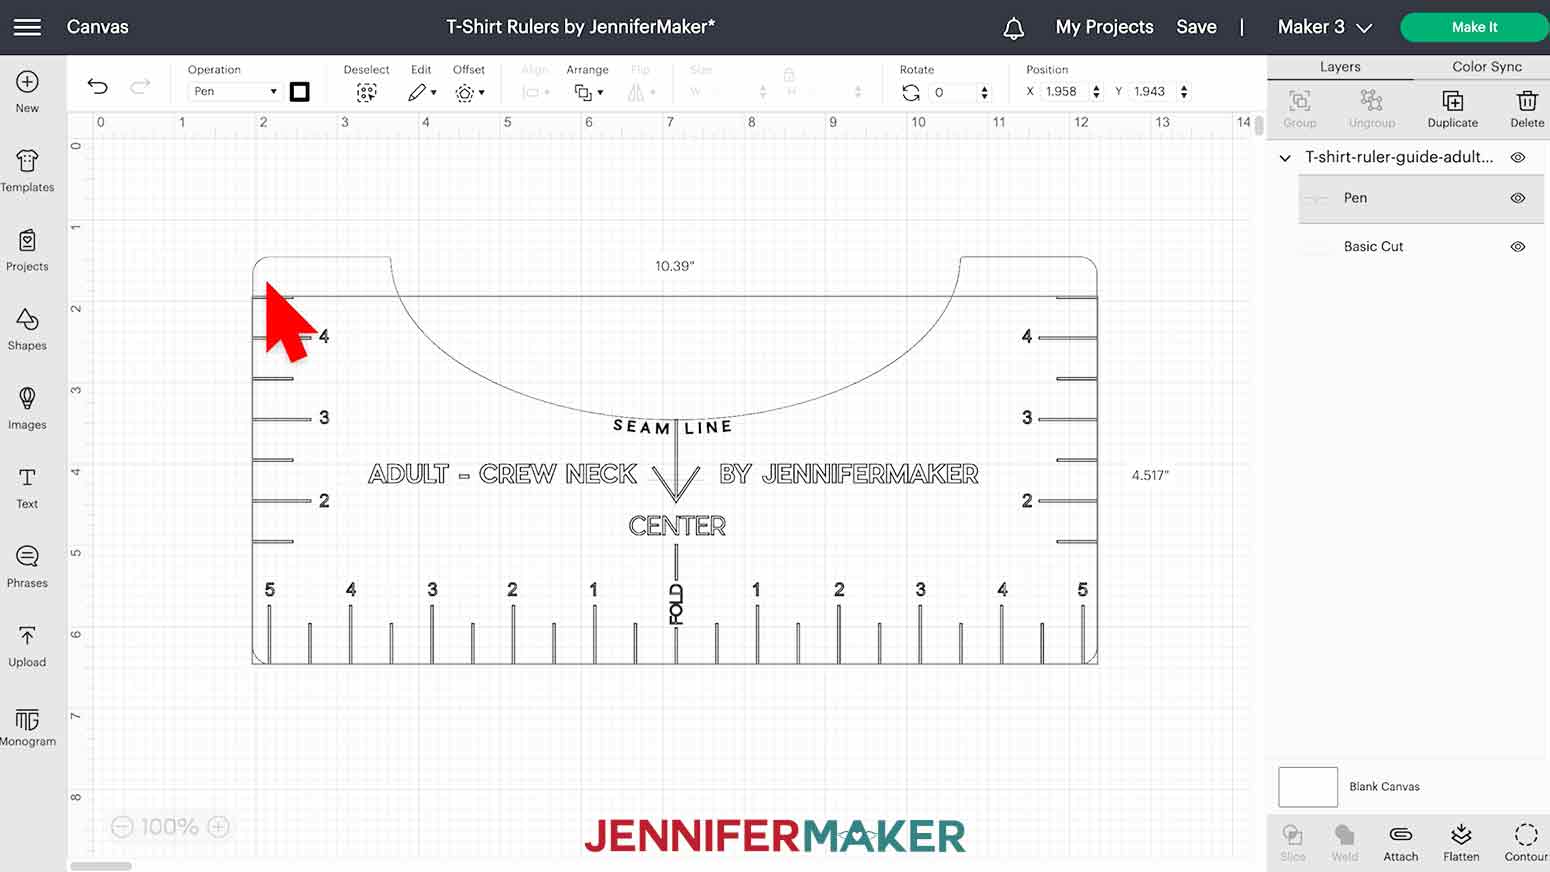 On the Cricut Design Space Canvas, select the top layer of the Adult Crew-Neck T-Shirt Ruler, then click the drop-down menu under "Operation" and select "Pen."